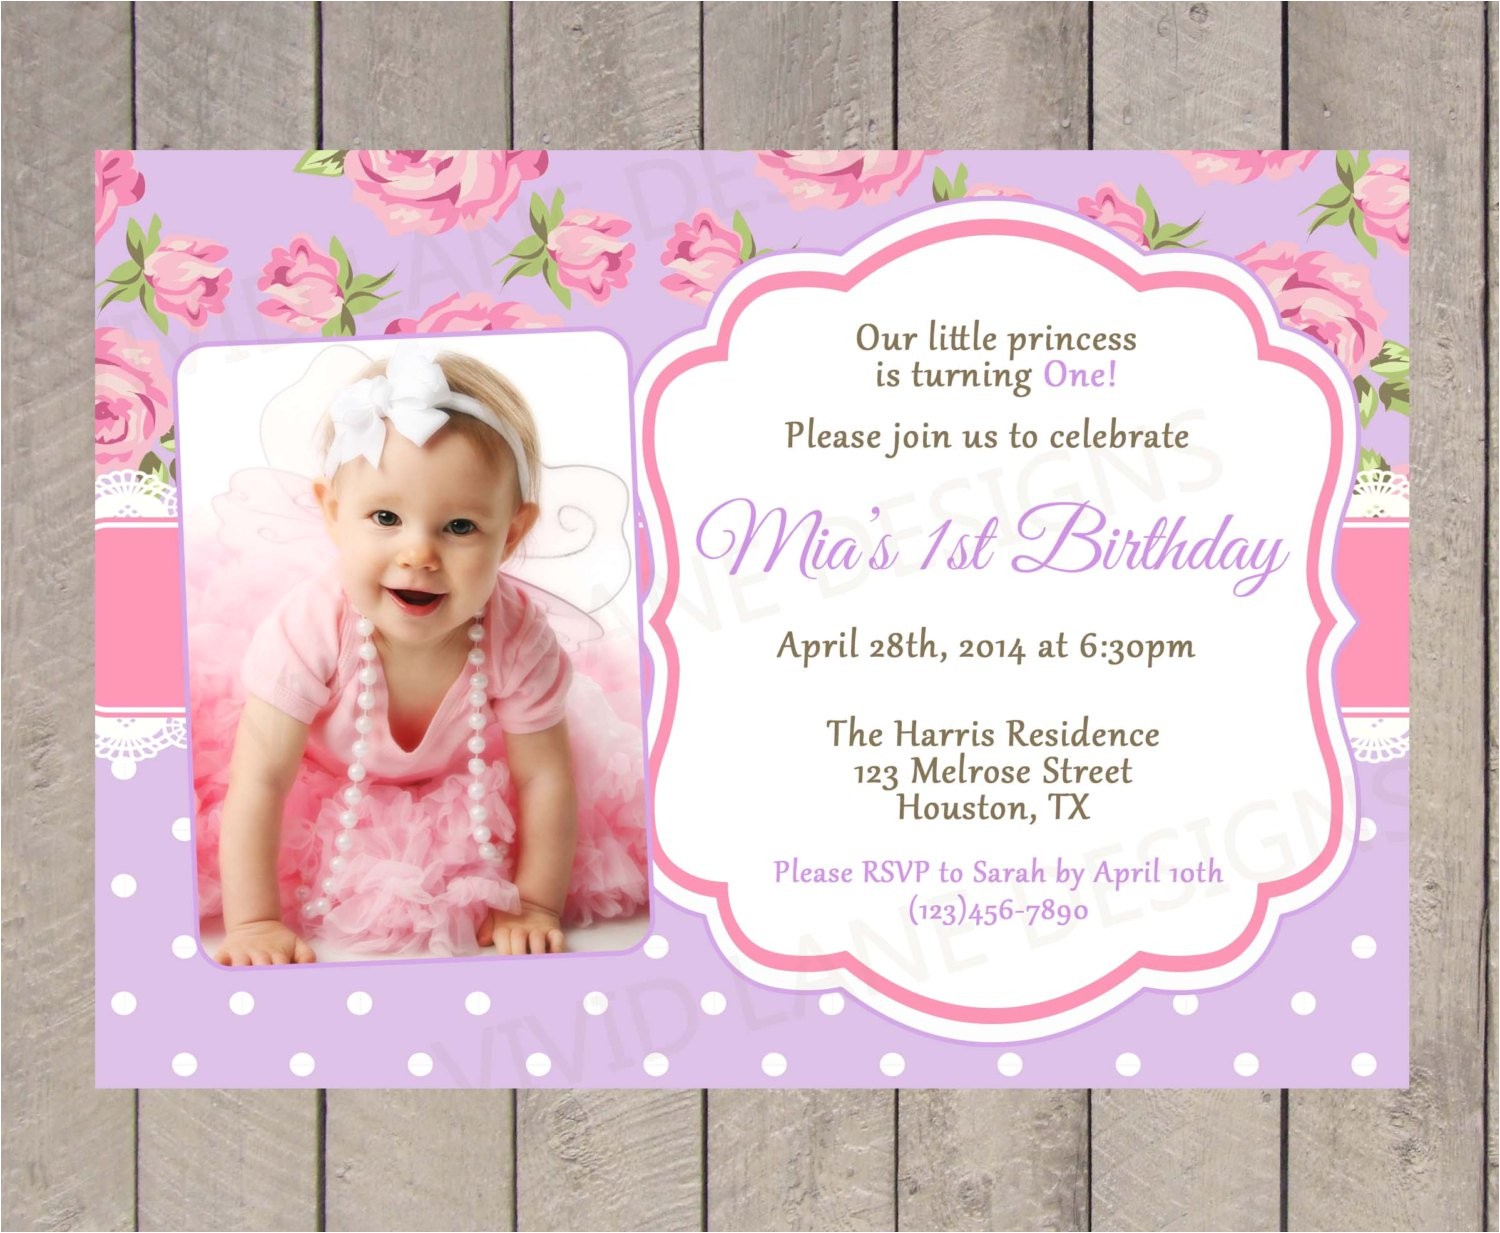 Baptism and Birthday Party Invitations Christening and Birthday Invitation Best Party Ideas